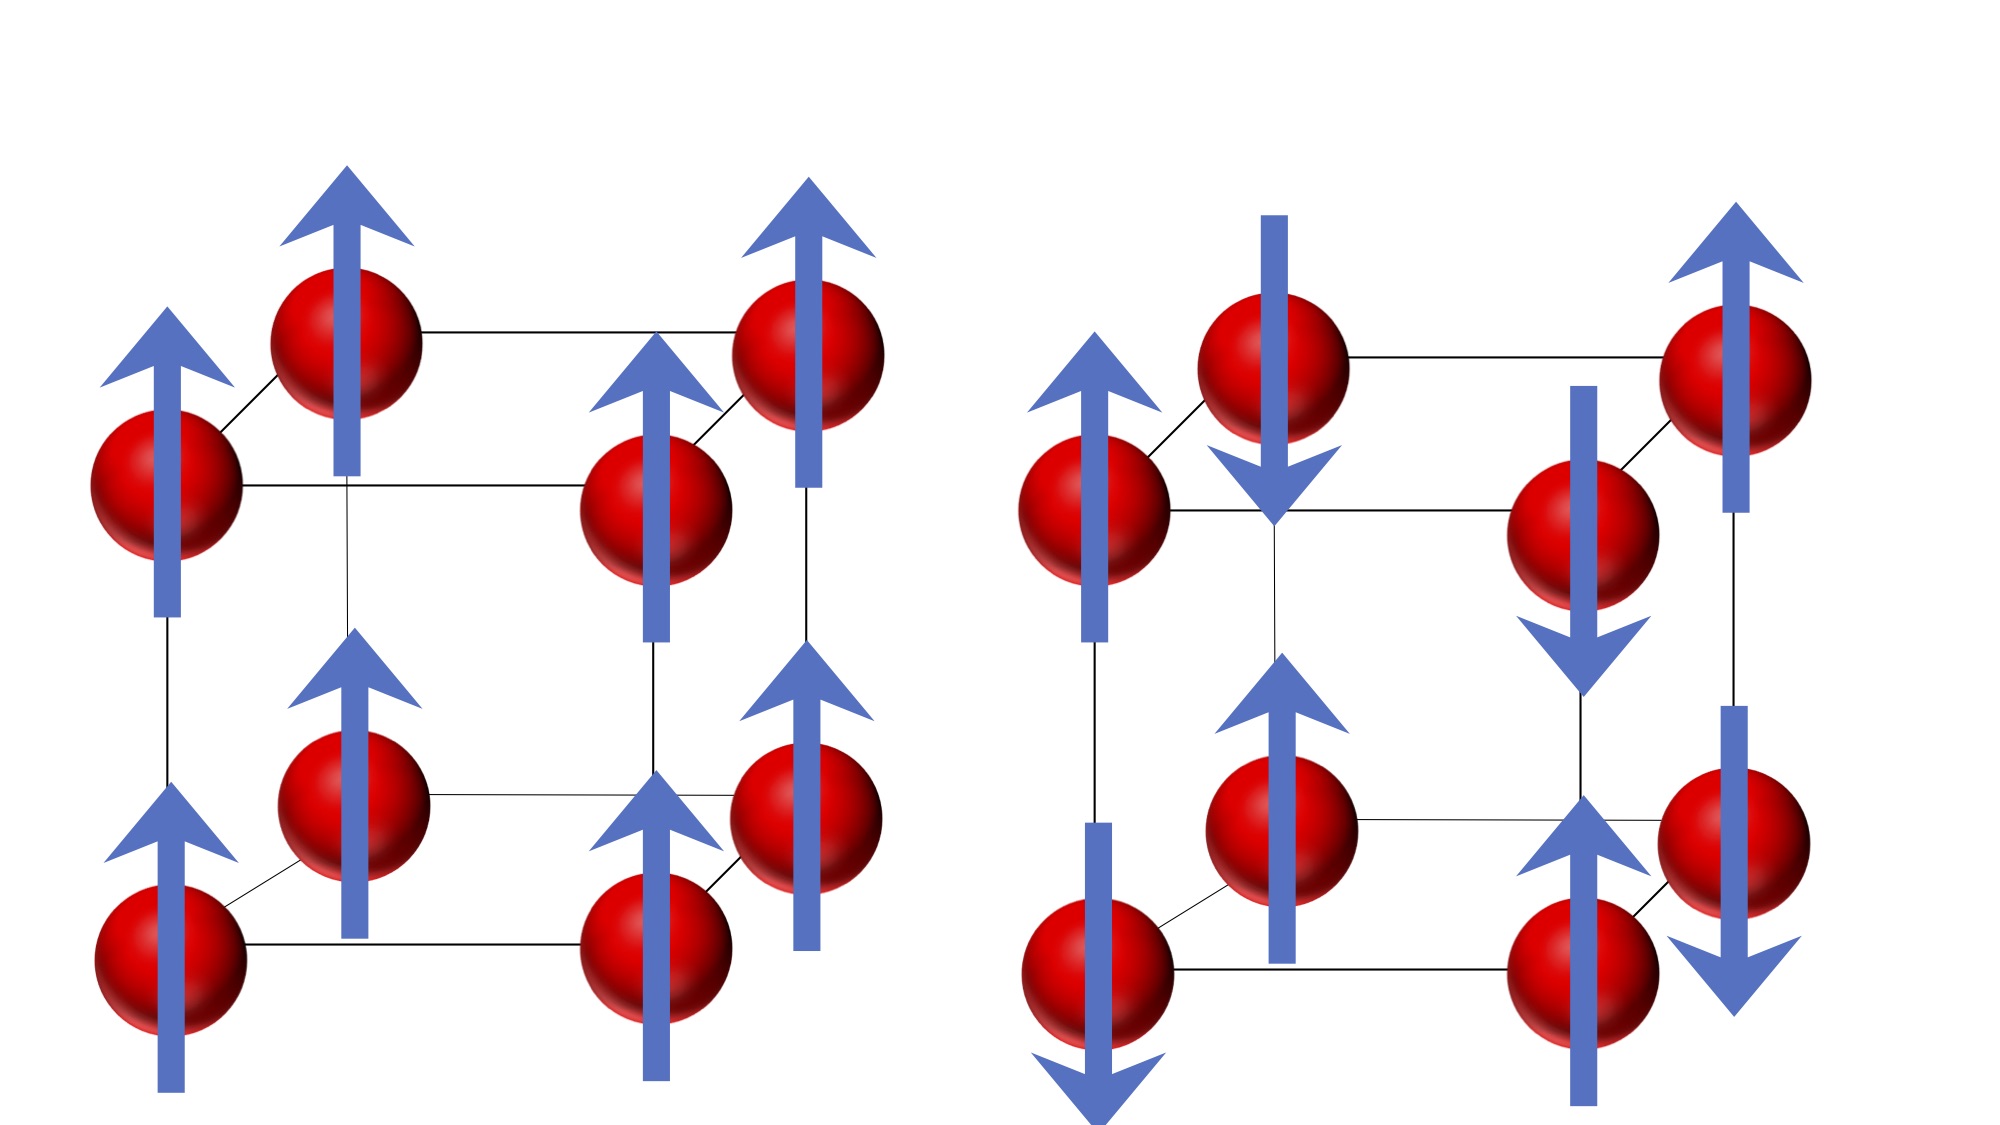 Fig. 1 (Click to enlarge). In a ferromagnet (left), the magnetic moments of the atoms point in one direction.  In an antiferromagnet (right), the magnetic moments alternate. 